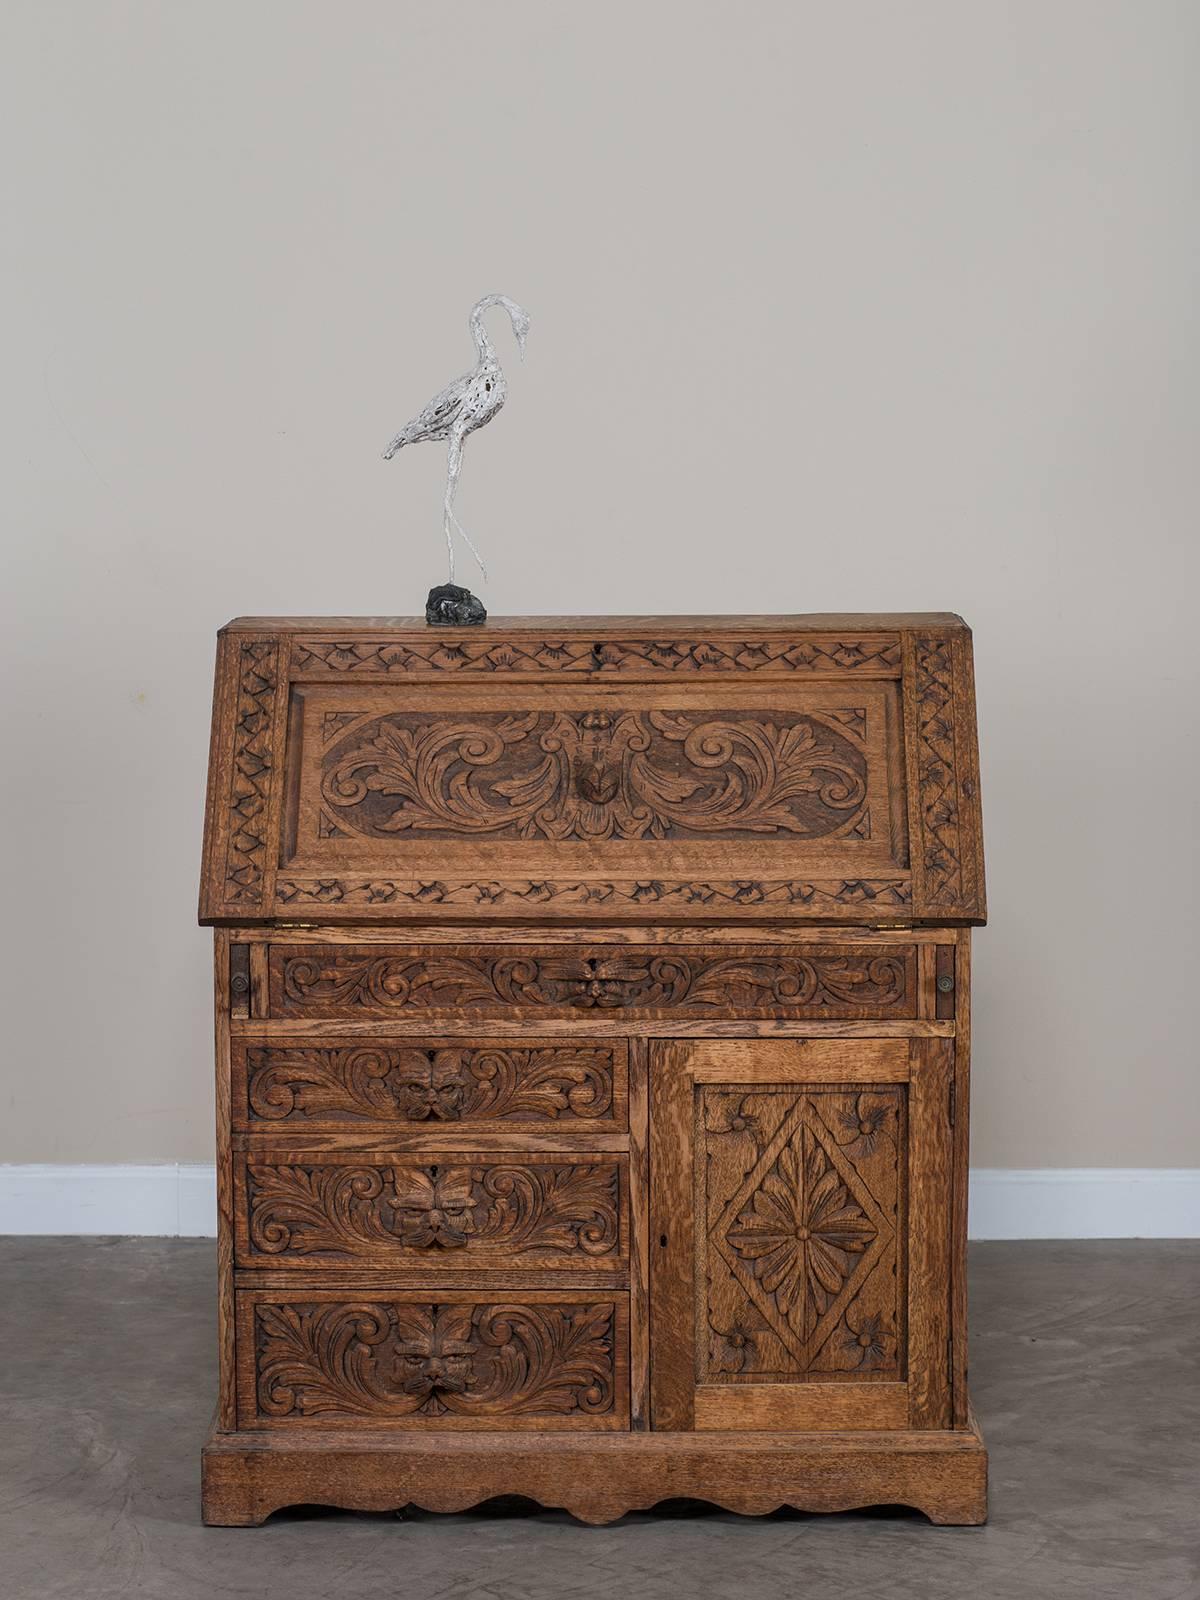 Receive our new selections direct from 1stdibs by email each week. Please click on “Follow Dealer” button below and see them first!

The bold carving seen in this antique English oak secretary base gives a powerful visual impression. The Arts and